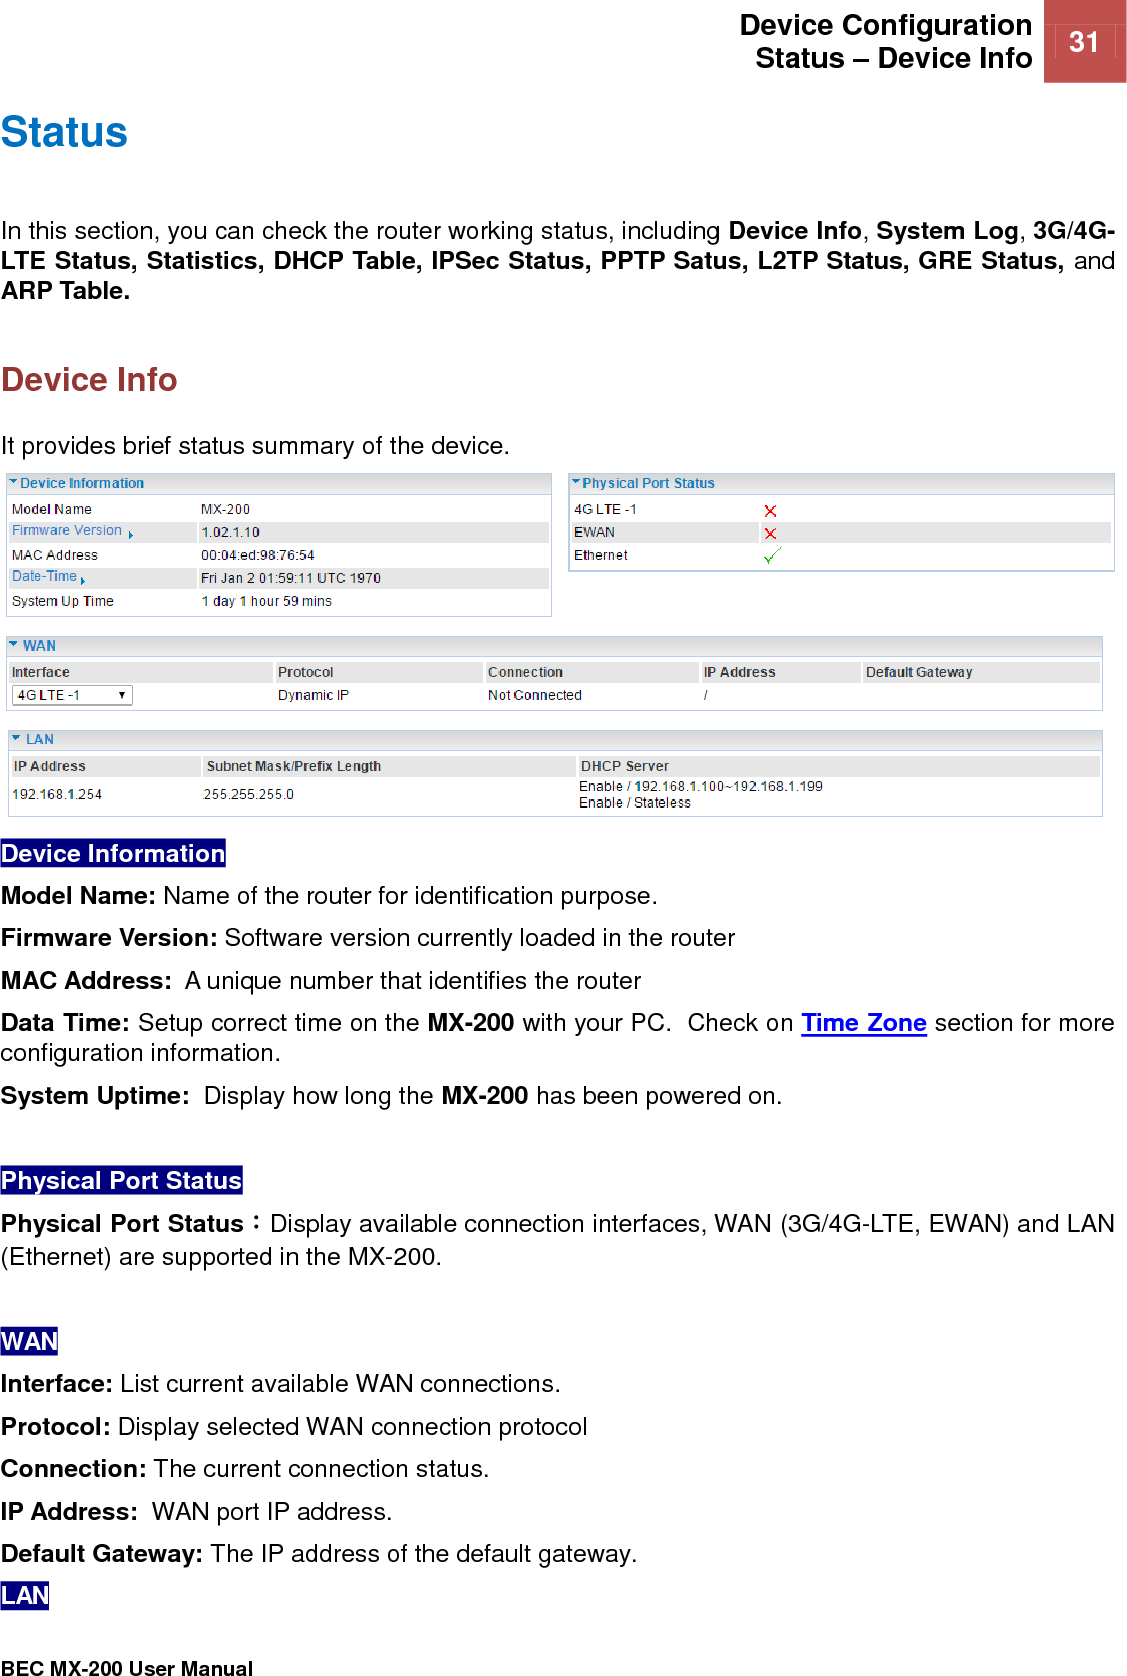  Device Configuration Status – Device Info    31   BEC MX-200 User Manual  Status In this section, you can check the router working status, including Device Info, System Log, 3G/4G- LTE Status, Statistics, DHCP Table, IPSec Status, PPTP Satus, L2TP Status, GRE Status, and ARP Table.  Device Info It provides brief status summary of the device.  Device Information  Model Name: Name of the router for identification purpose. Firmware Version: Software version currently loaded in the router MAC Address:  A unique number that identifies the router Data Time: Setup correct time on the MX-200 with your PC.  Check on Time Zone section for more configuration information.  System Uptime:  Display how long the MX-200 has been powered on.   Physical Port Status  Physical Port Status：Display available connection interfaces, WAN (3G/4G-LTE, EWAN) and LAN (Ethernet) are supported in the MX-200.   WAN Interface: List current available WAN connections.  Protocol: Display selected WAN connection protocol Connection: The current connection status. IP Address:  WAN port IP address. Default Gateway: The IP address of the default gateway. LAN 